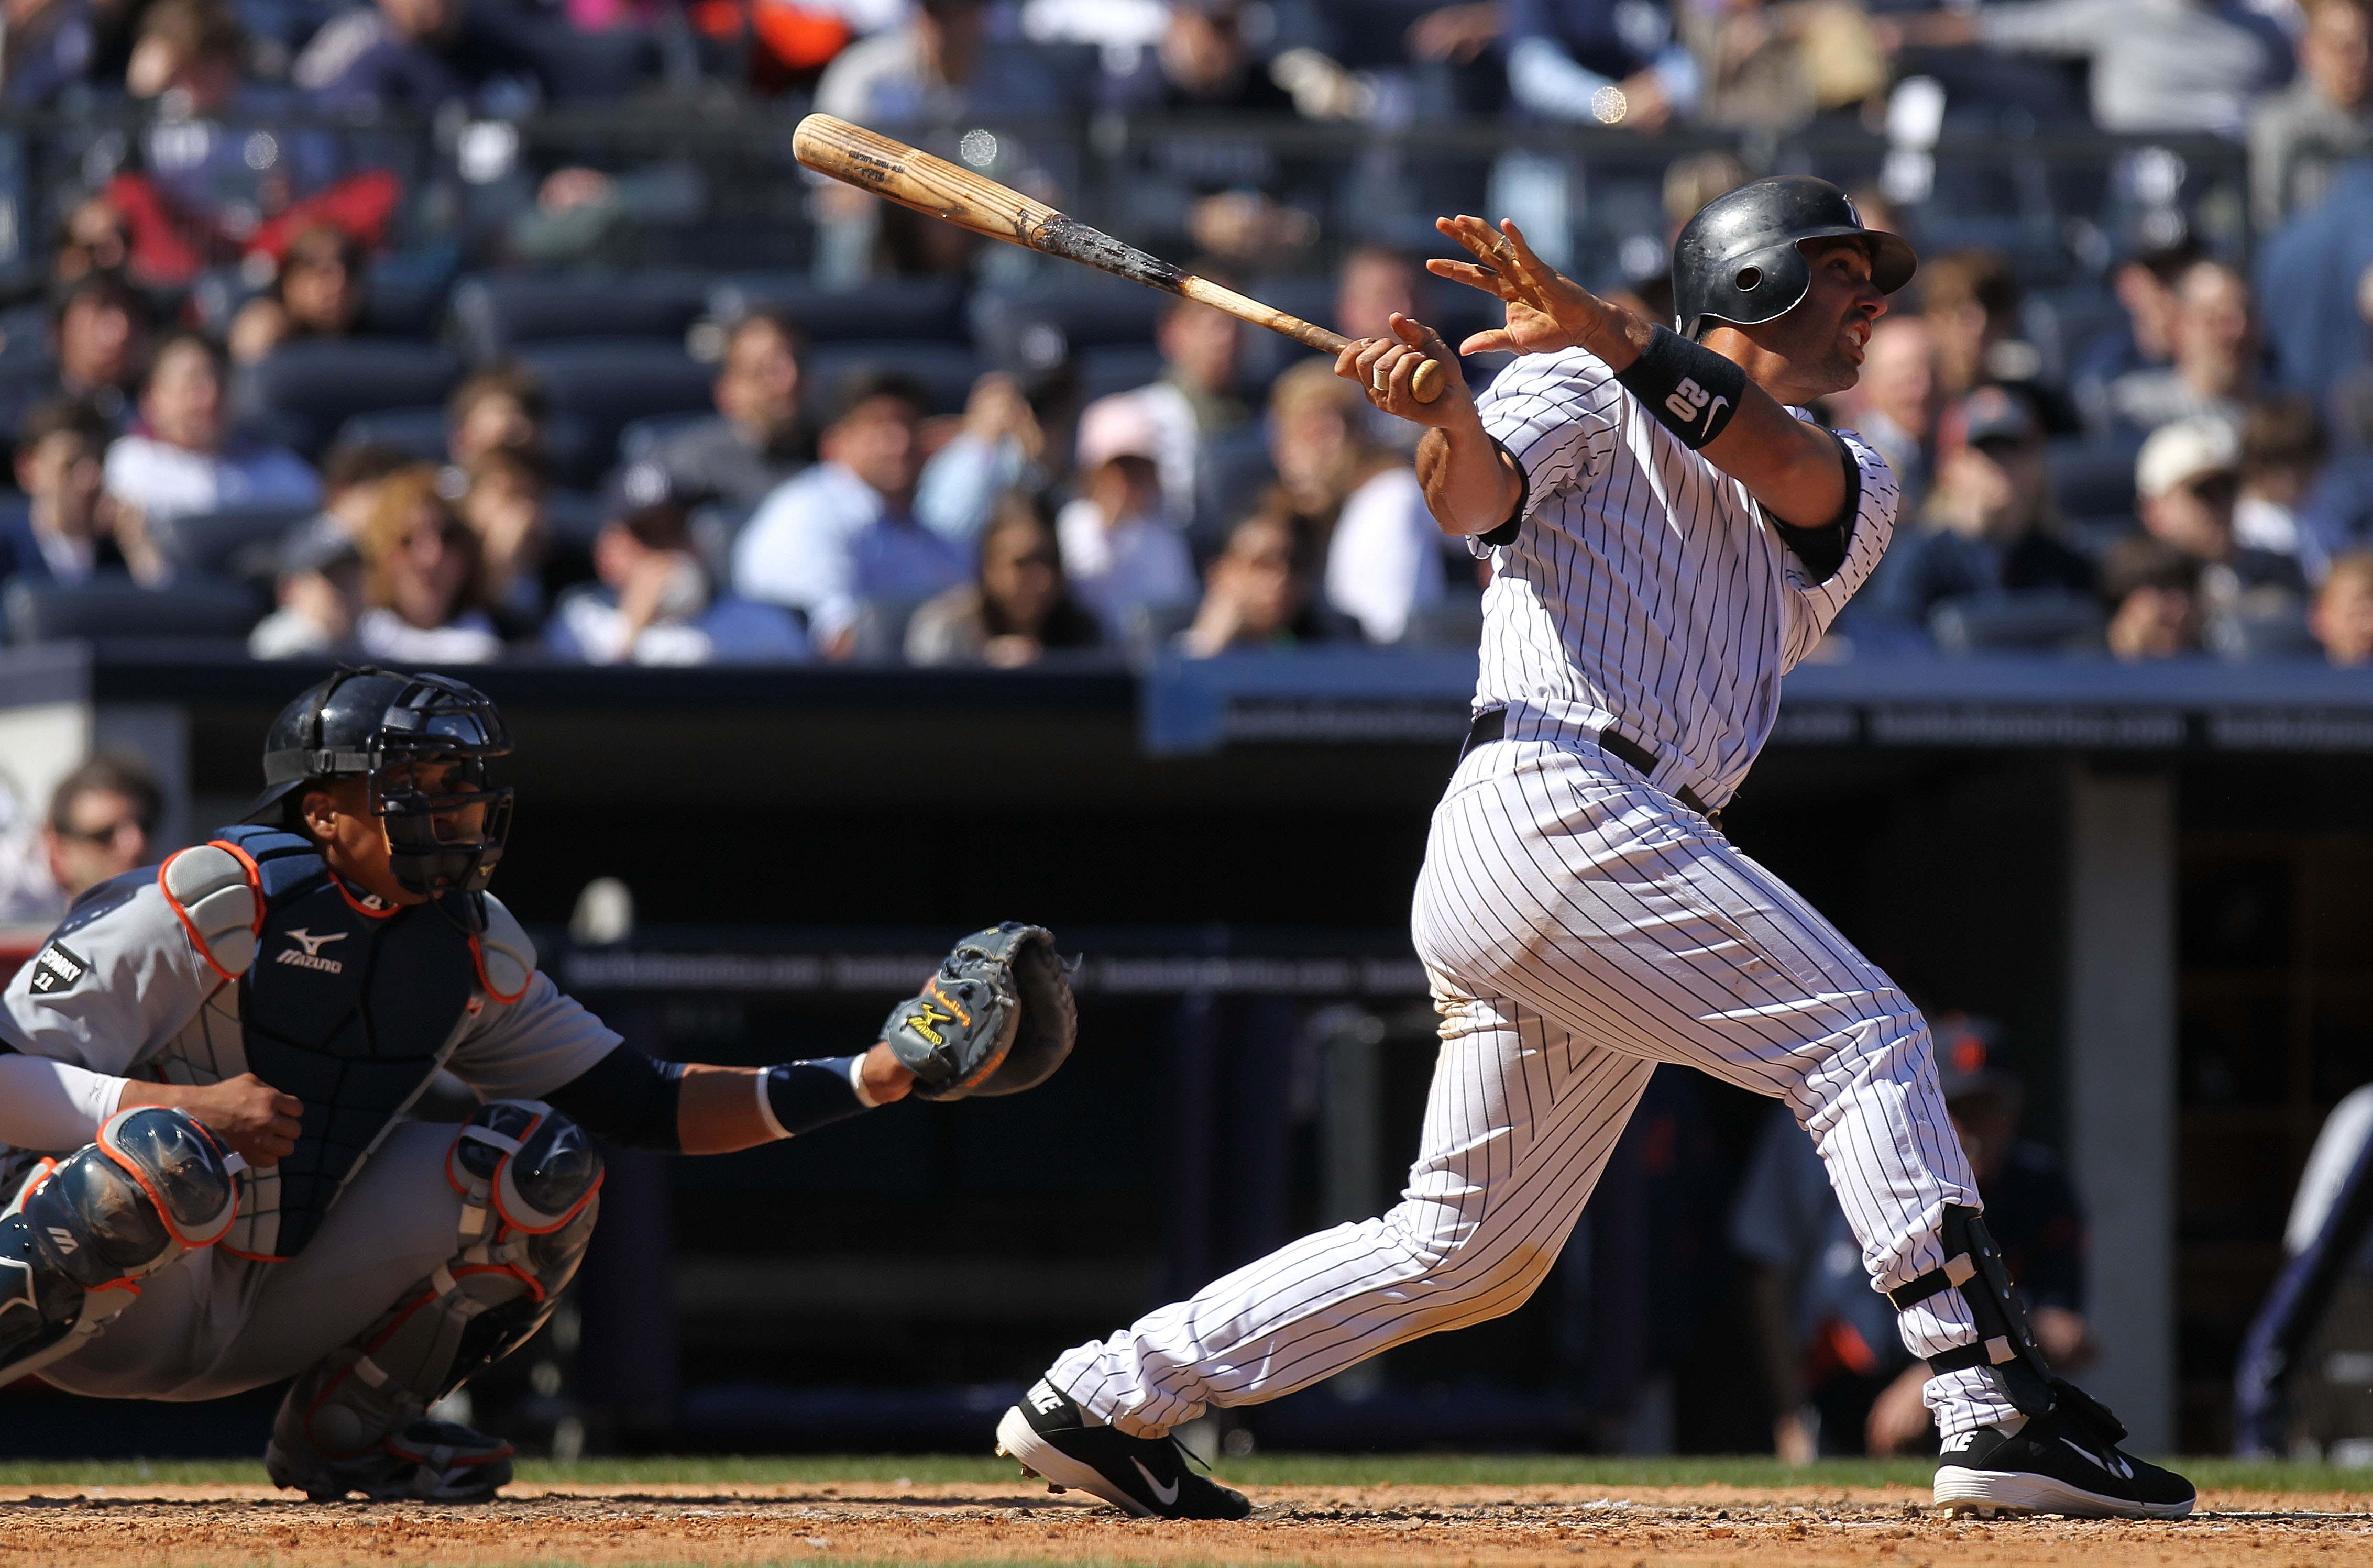 NEW YORK, NY - APRIL 03: Jorge Posada #20 of the New York Yankees hits his second homerun against the Detroit Tigers at Yankee Stadium on April 3, 2011 in the Bronx borough of New York City.  (Photo by Nick Laham/Getty Images)